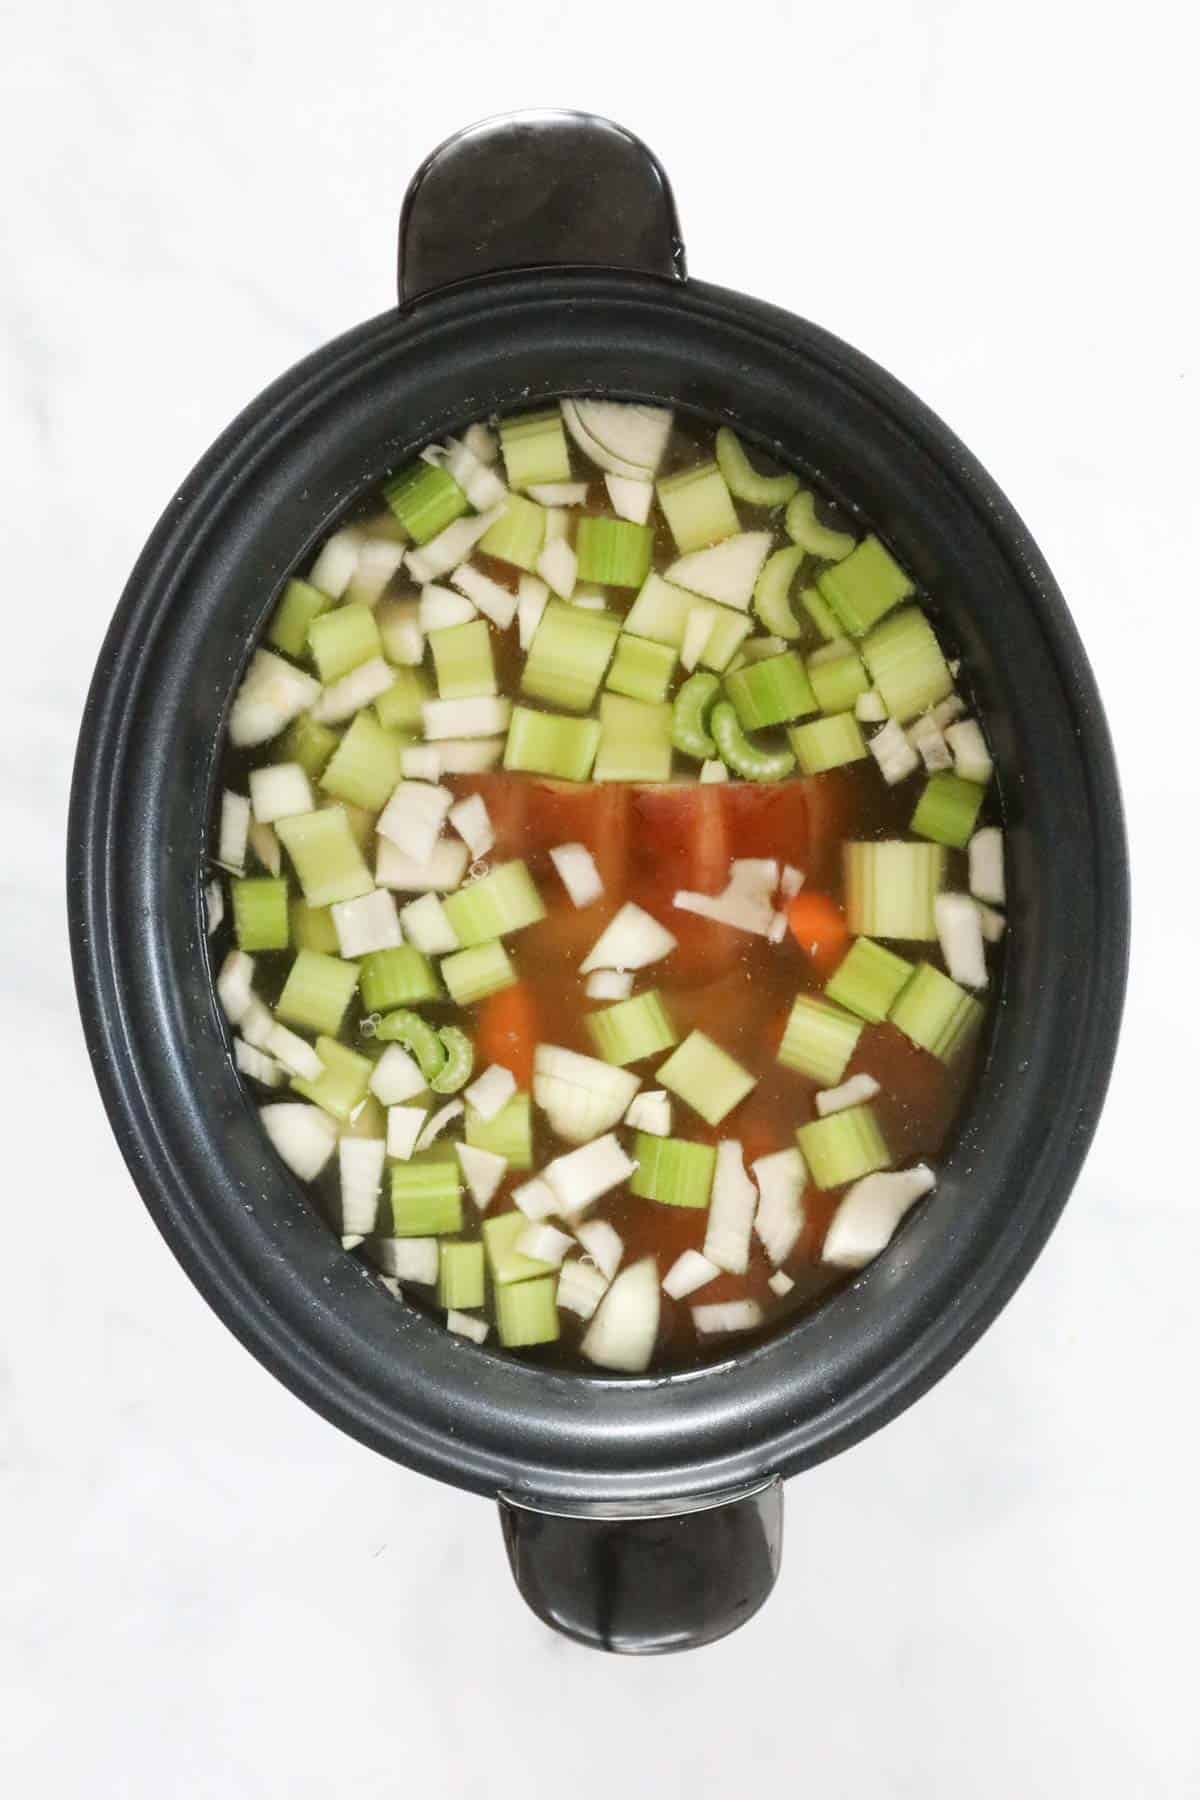 Liquid vegetable stock added to the slow cooker.